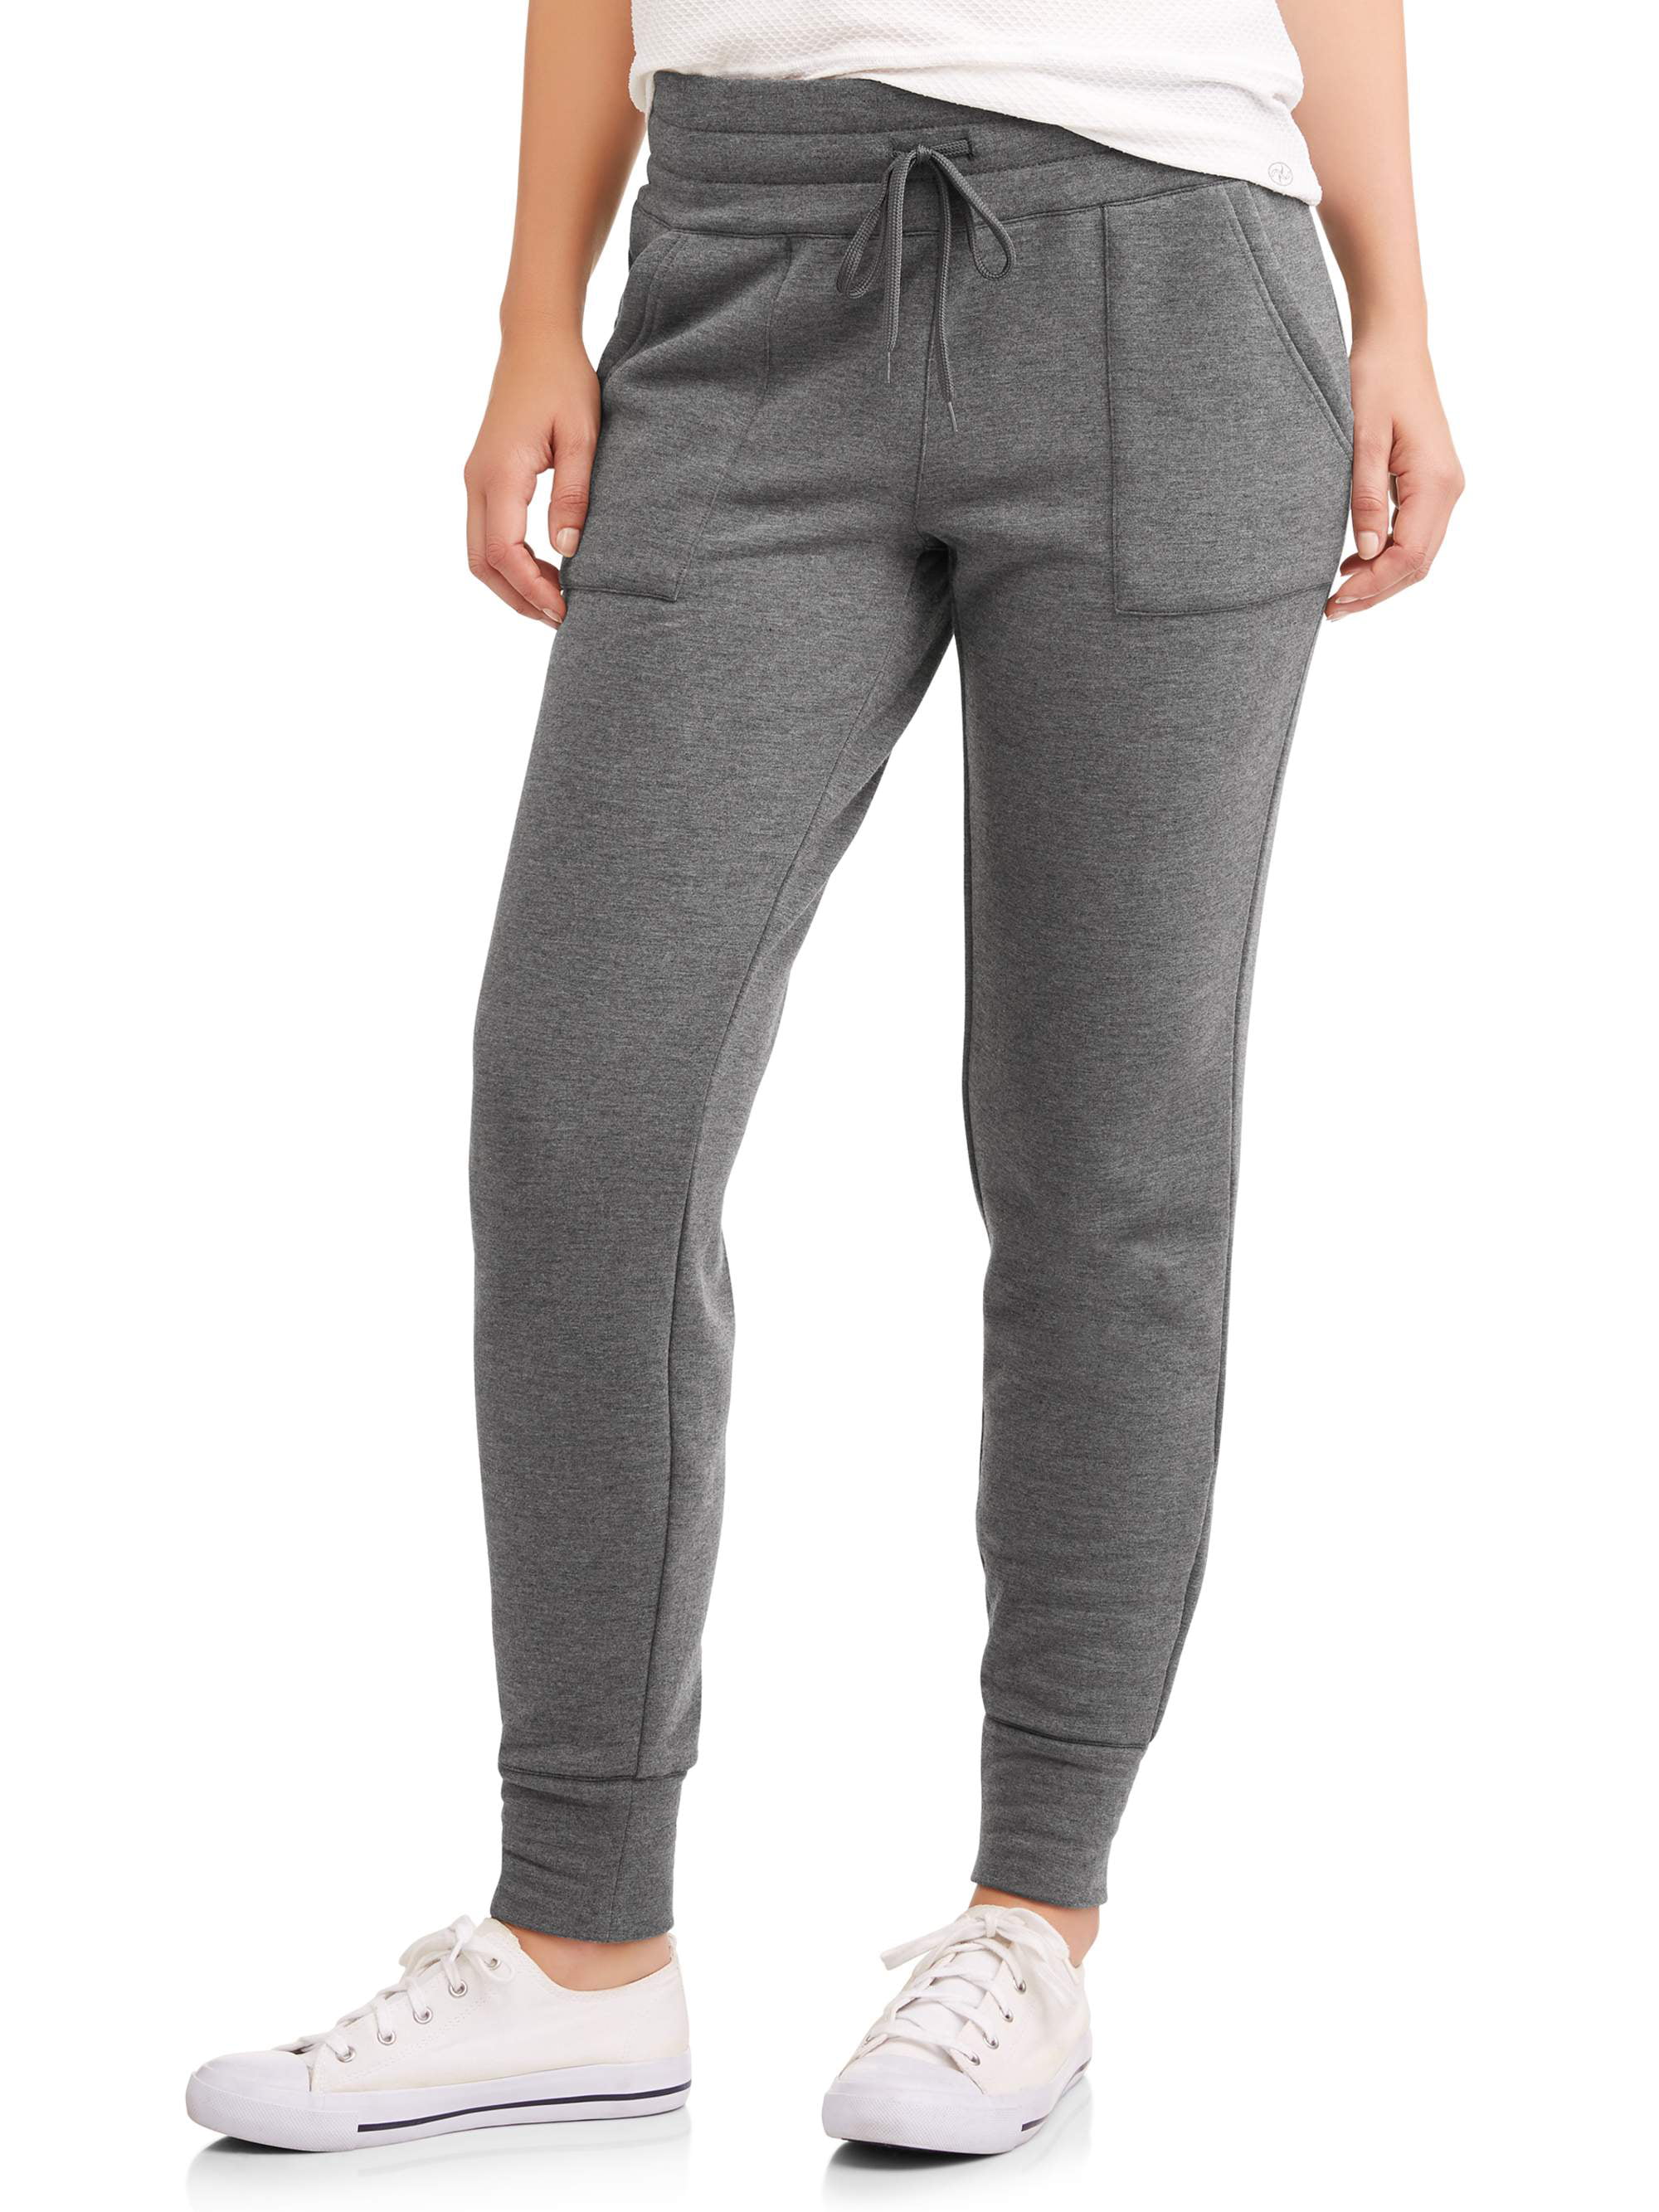 Athletic Works - Athletic Works Women's Athleisure Soft Fleece Jogger ...